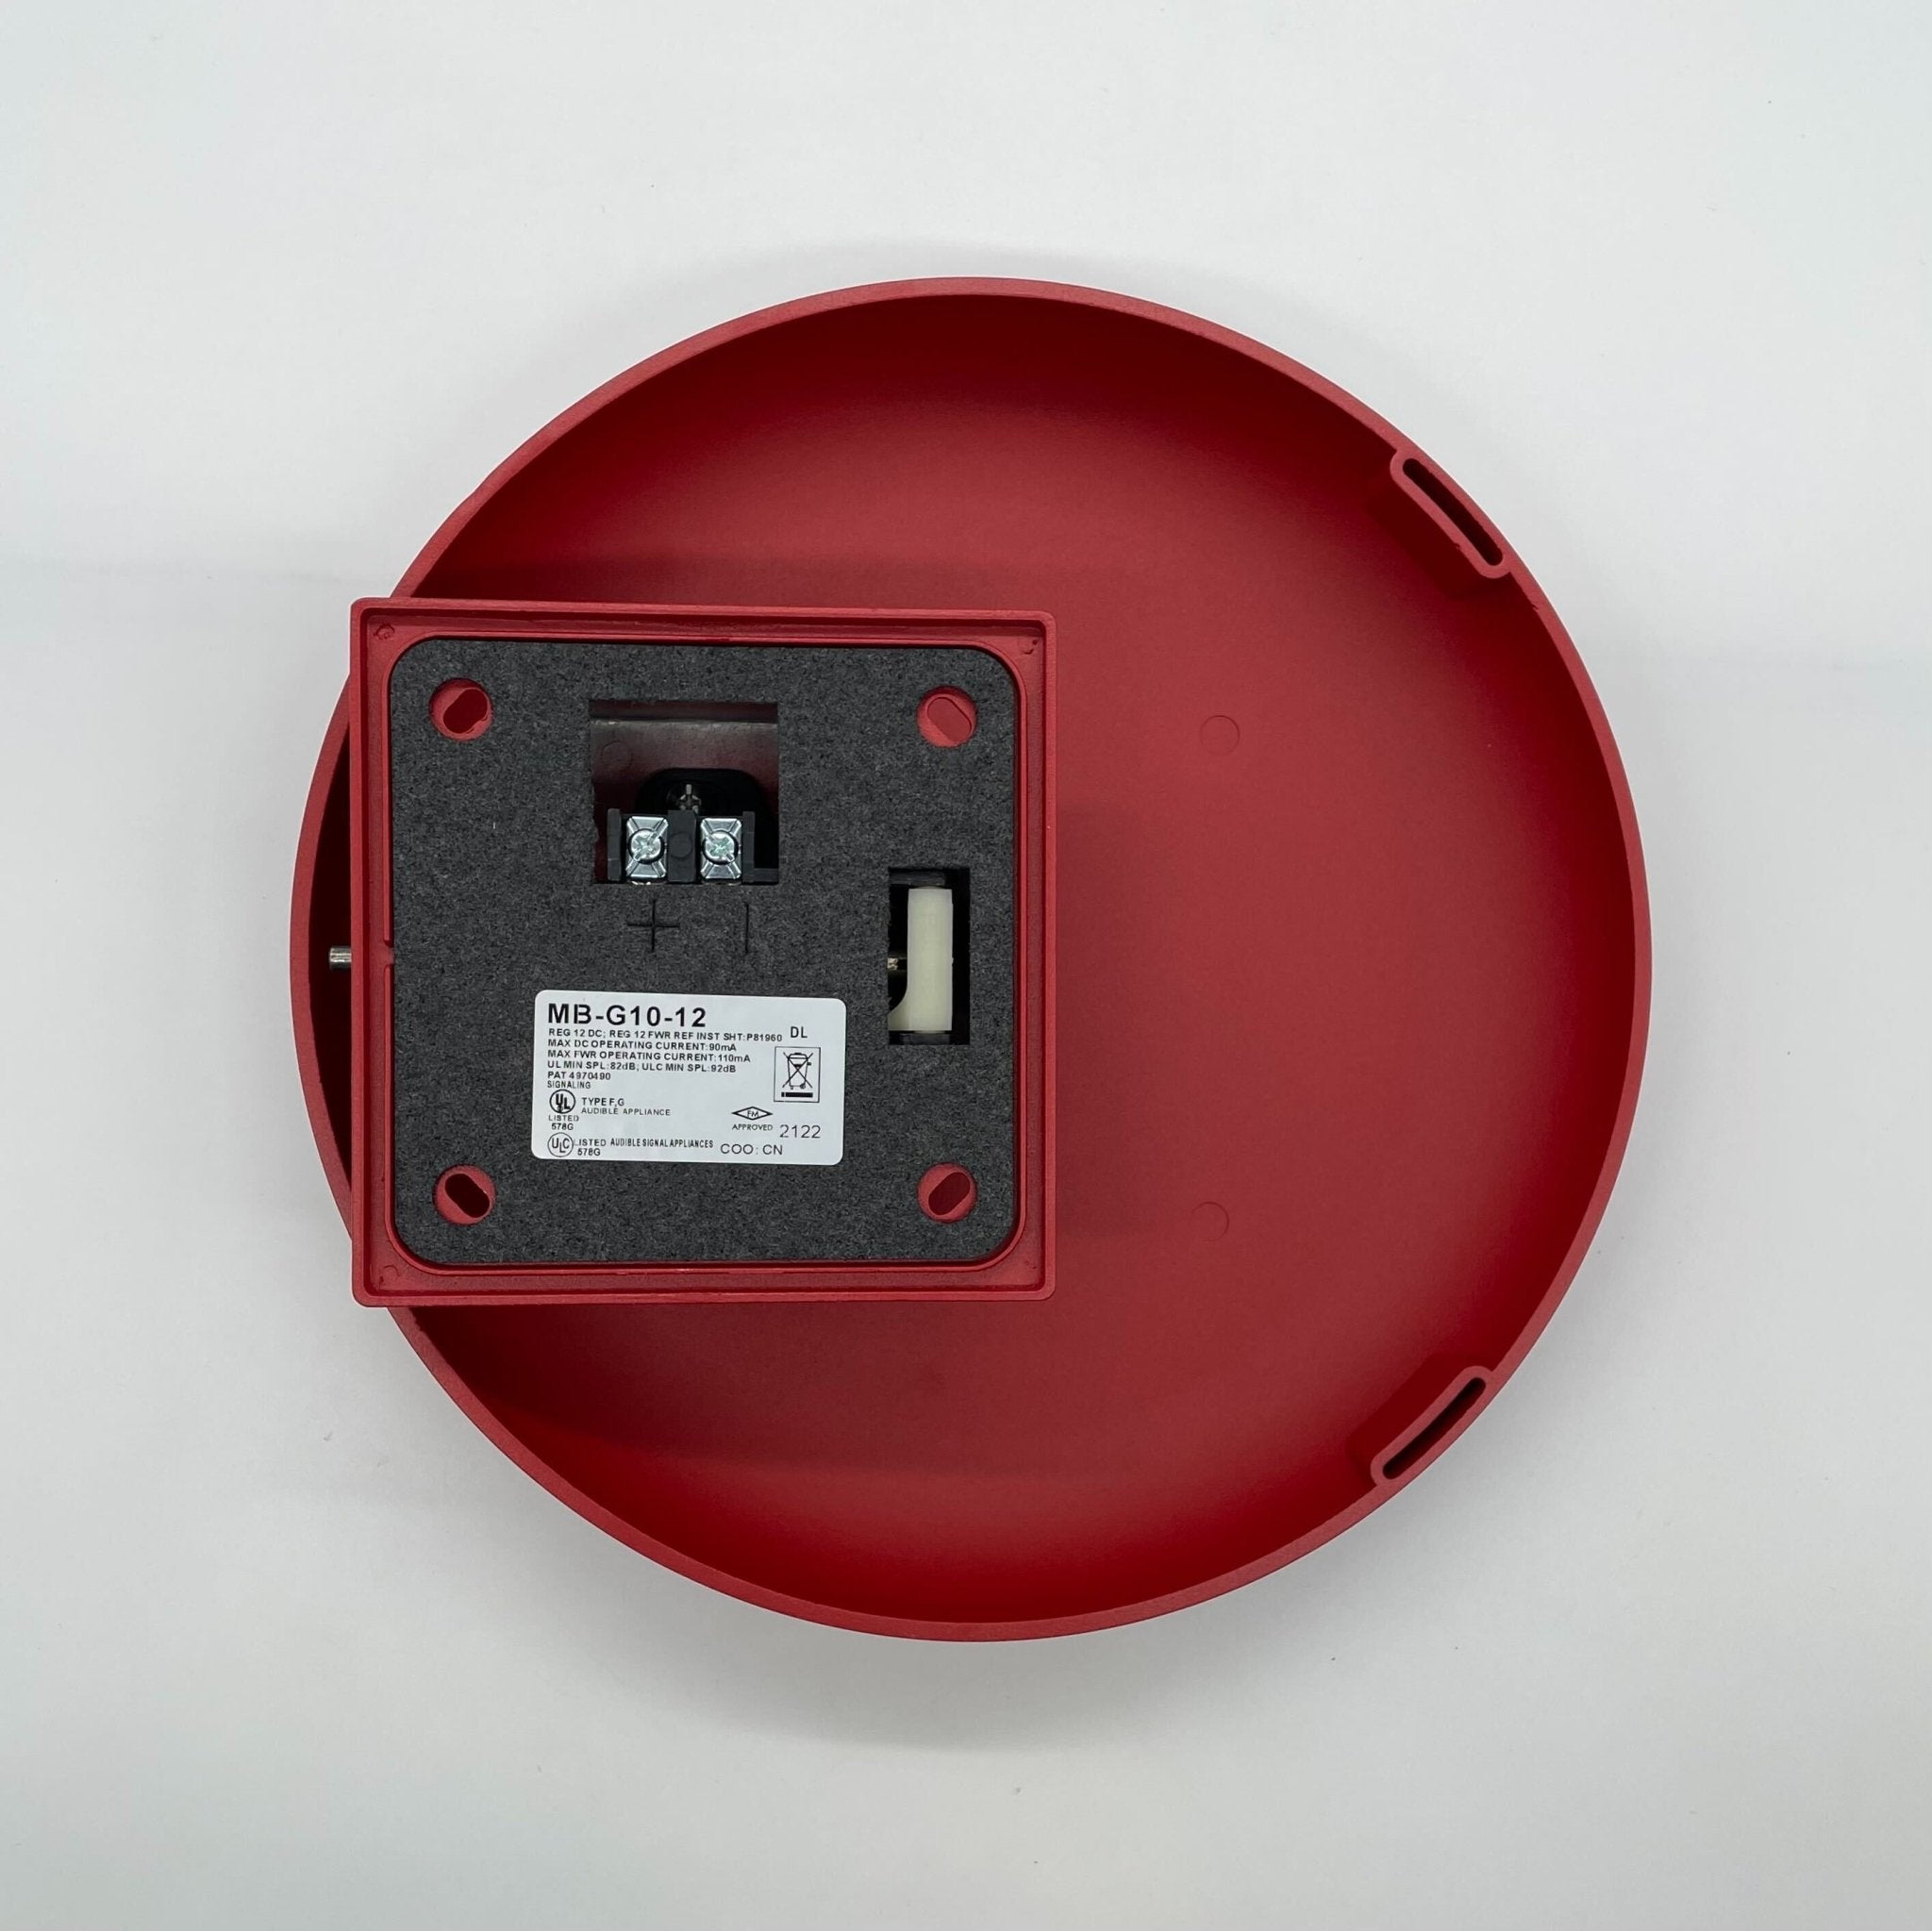 Wheelock MB-G10-12-R - The Fire Alarm Supplier